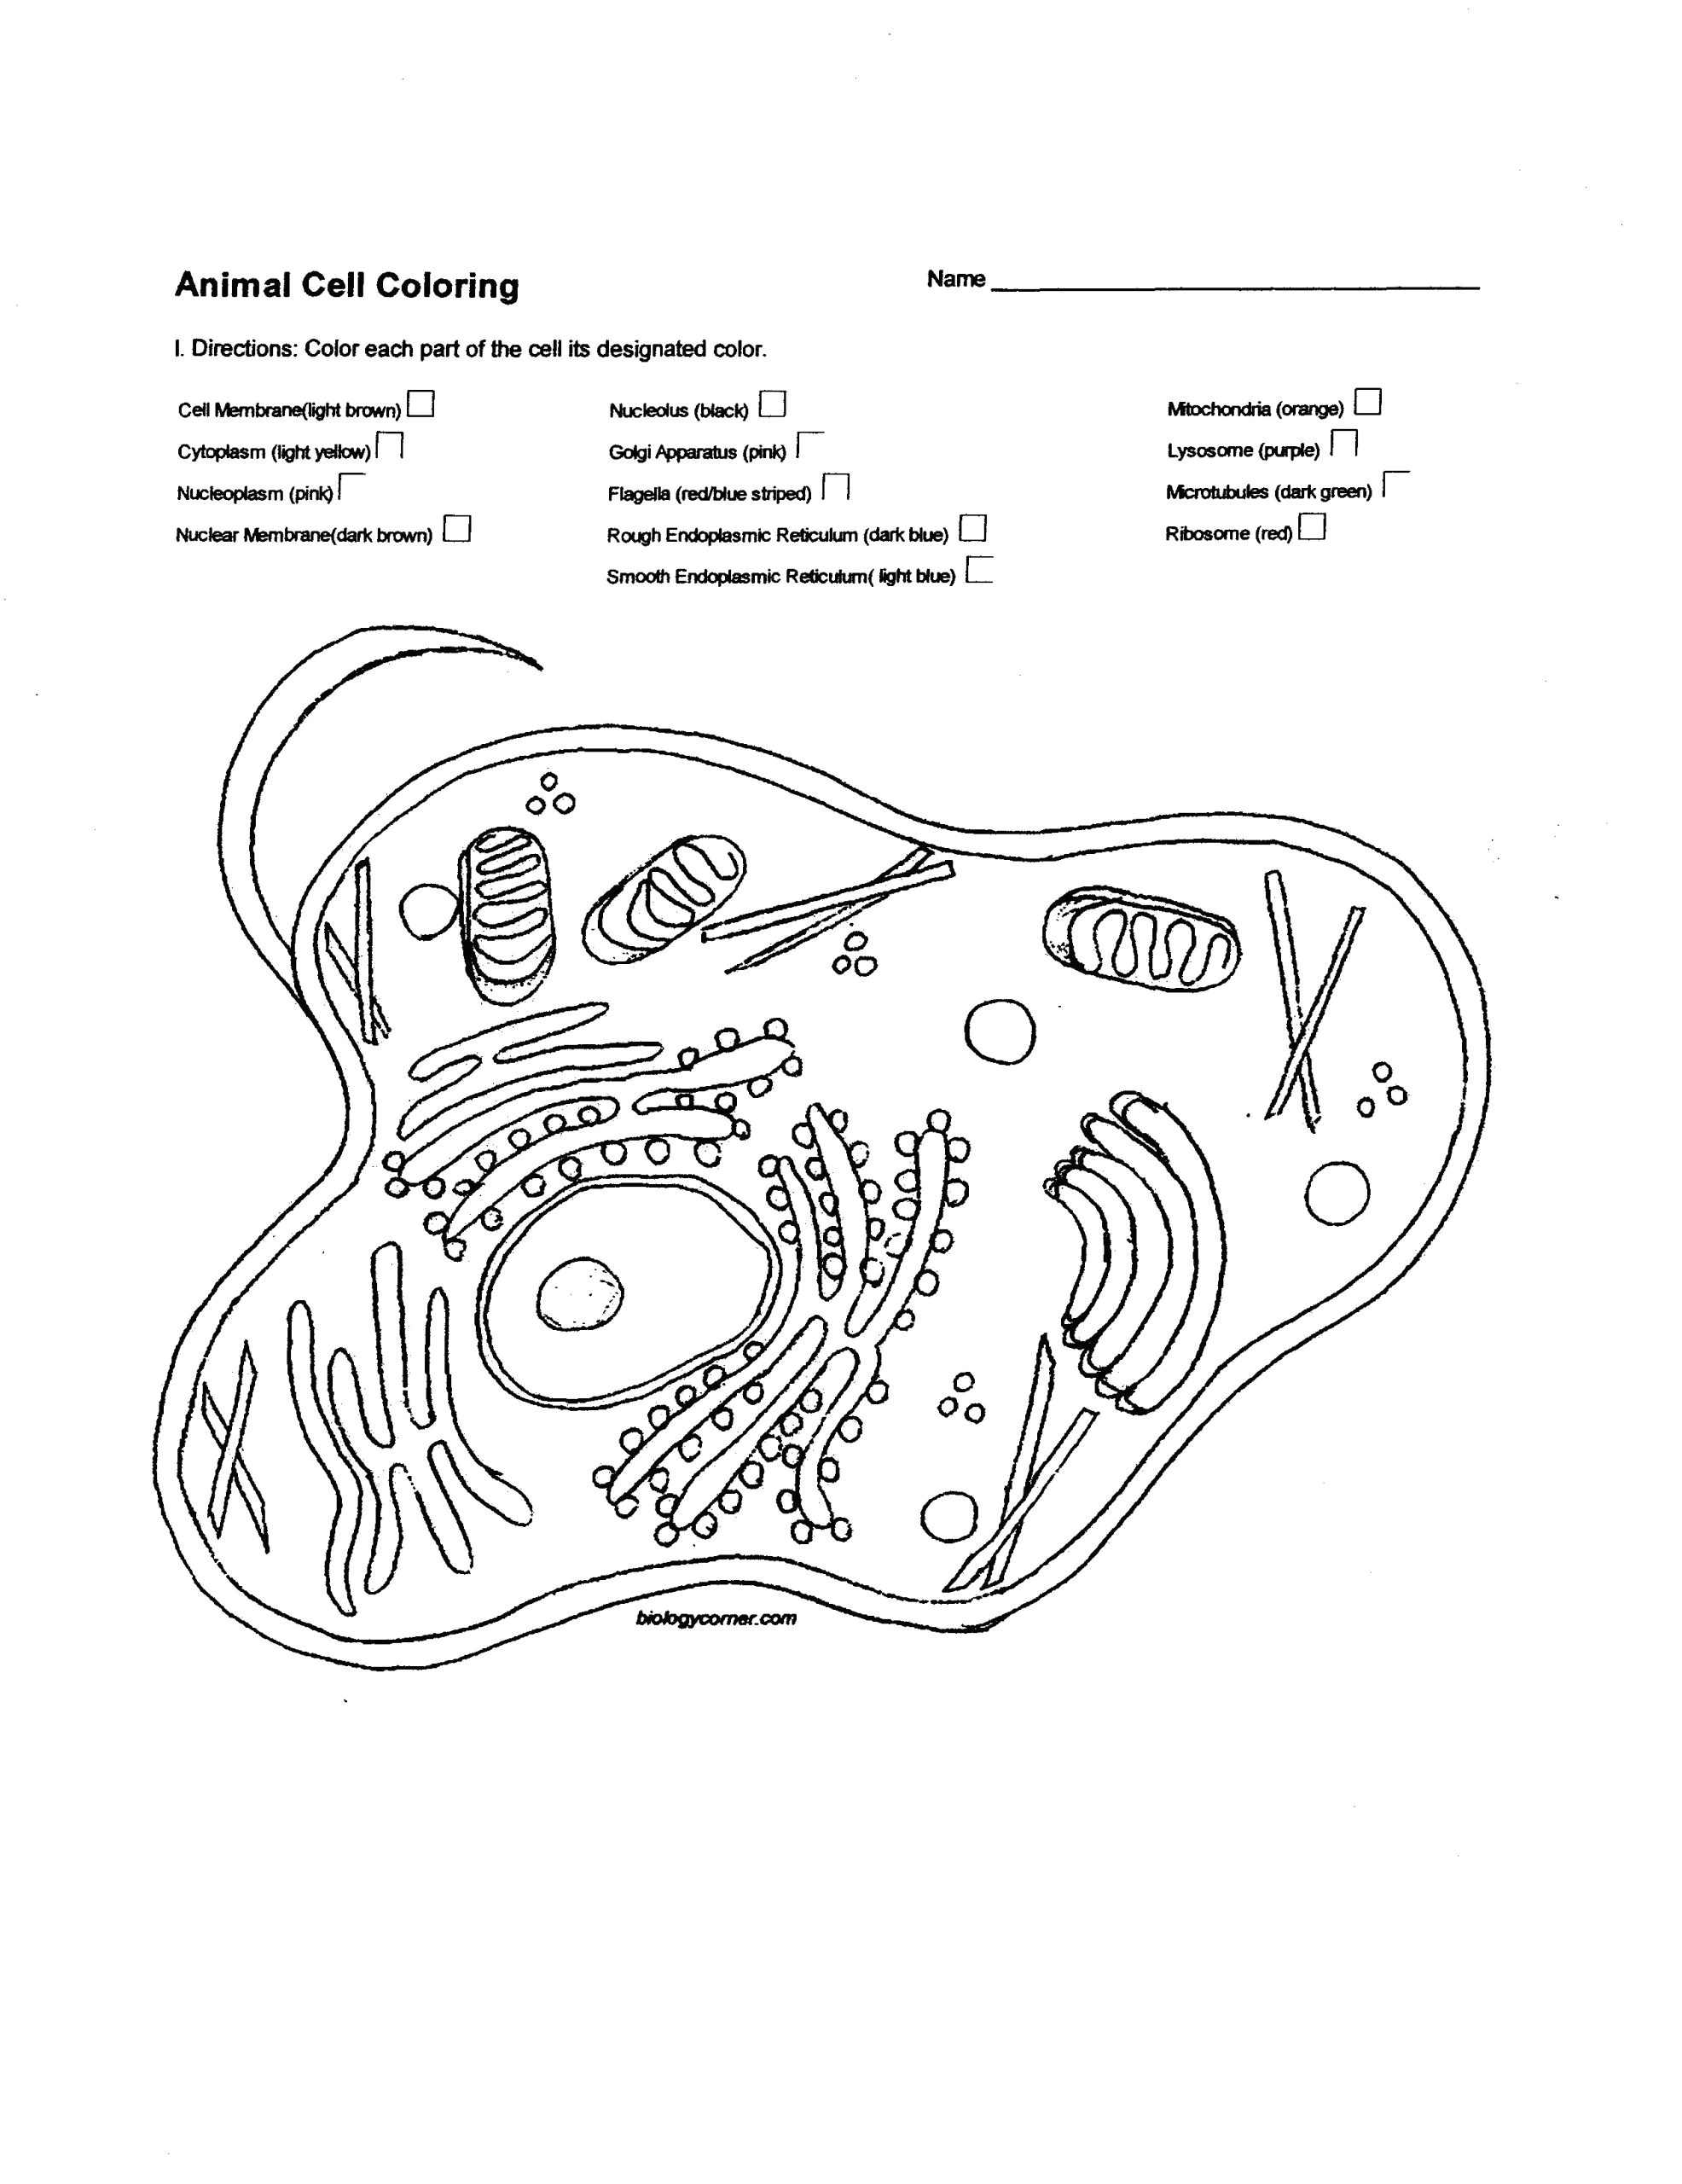 biology corner plant cell color pages tremendous image inspirations biologycorner com coloring animal drawing at getdrawings scaled ameba the brain diagram sheet jpg